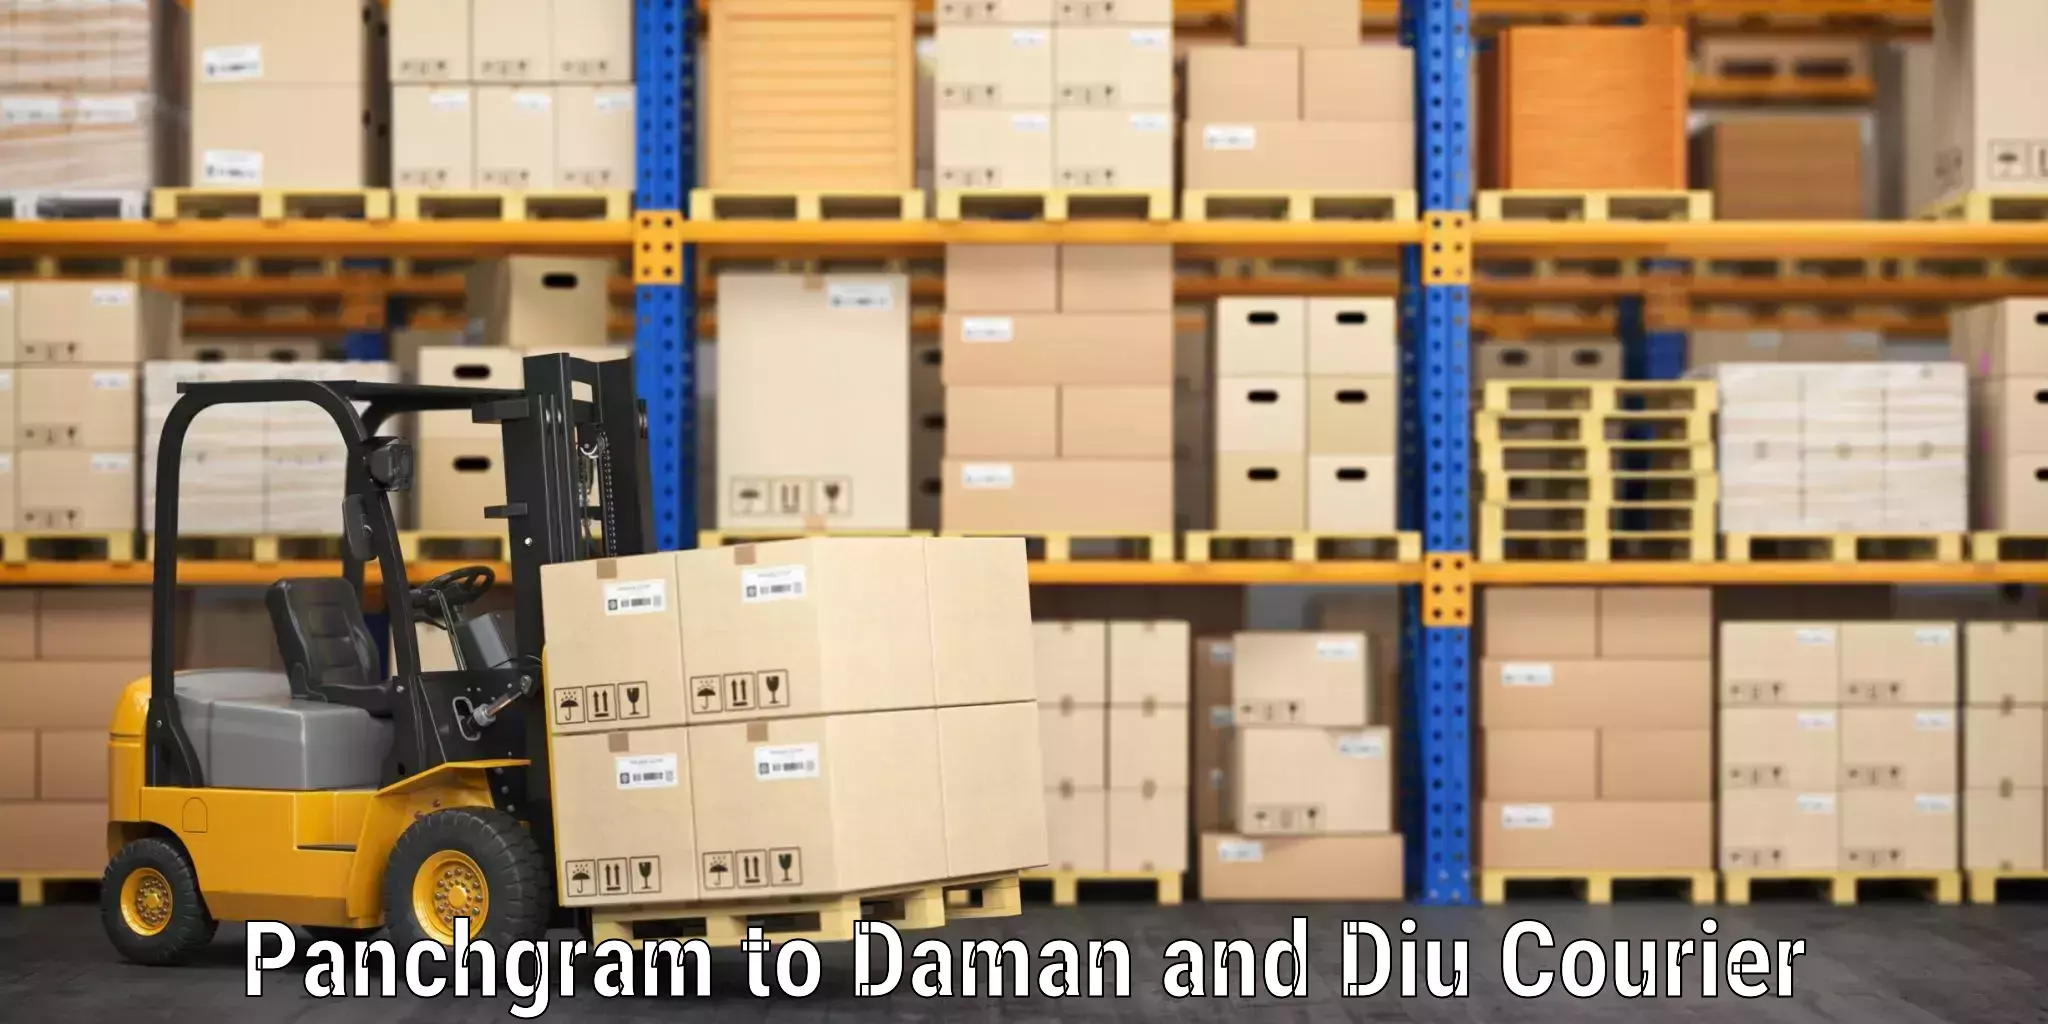 Automated luggage transport Panchgram to Daman and Diu